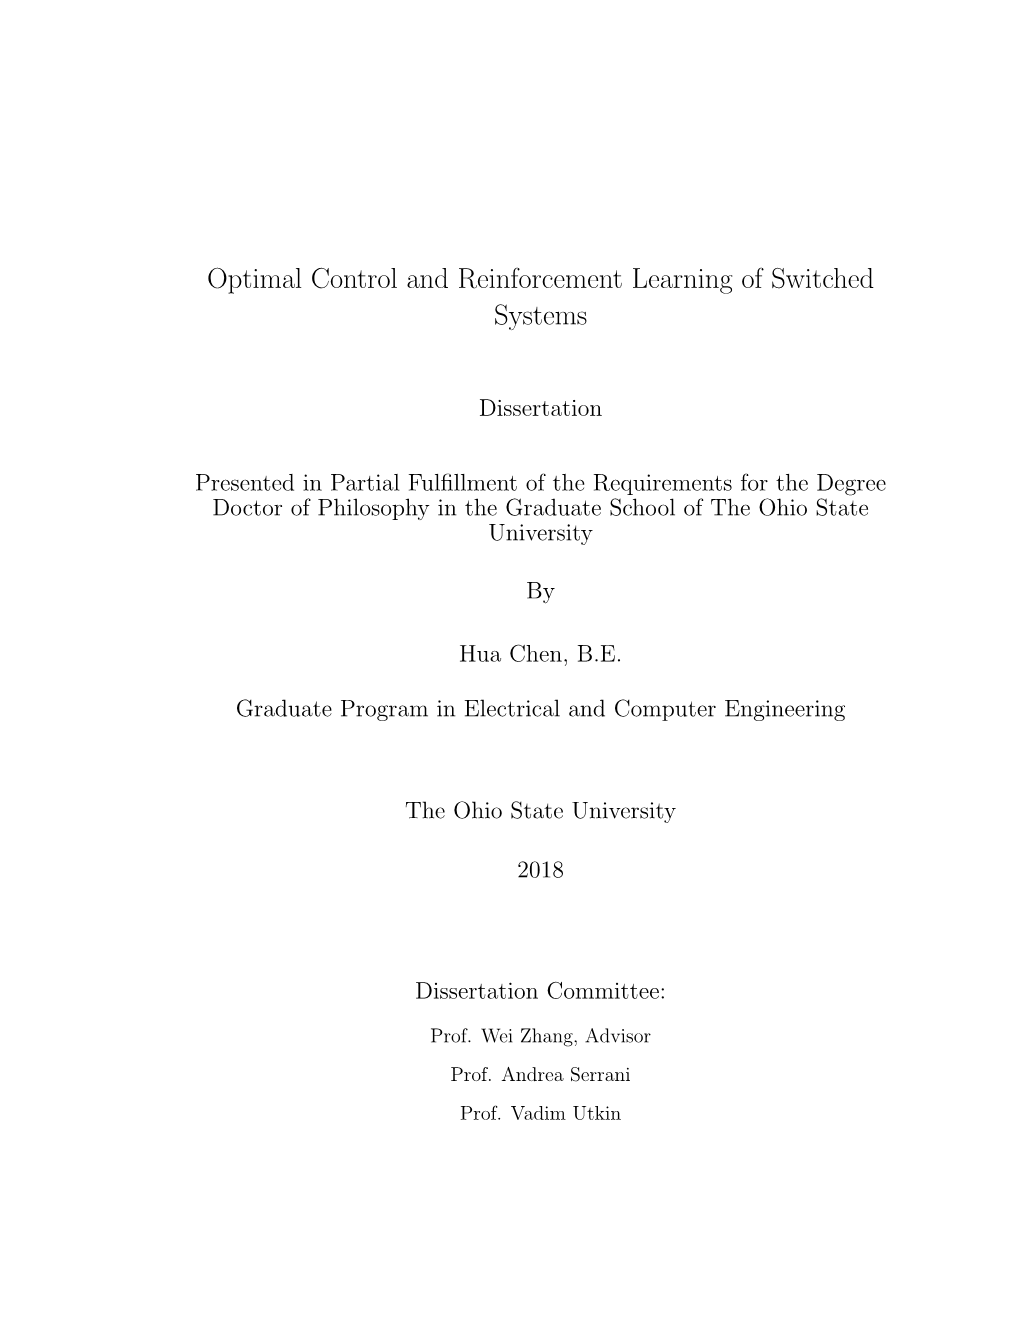 Optimal Control and Reinforcement Learning of Switched Systems